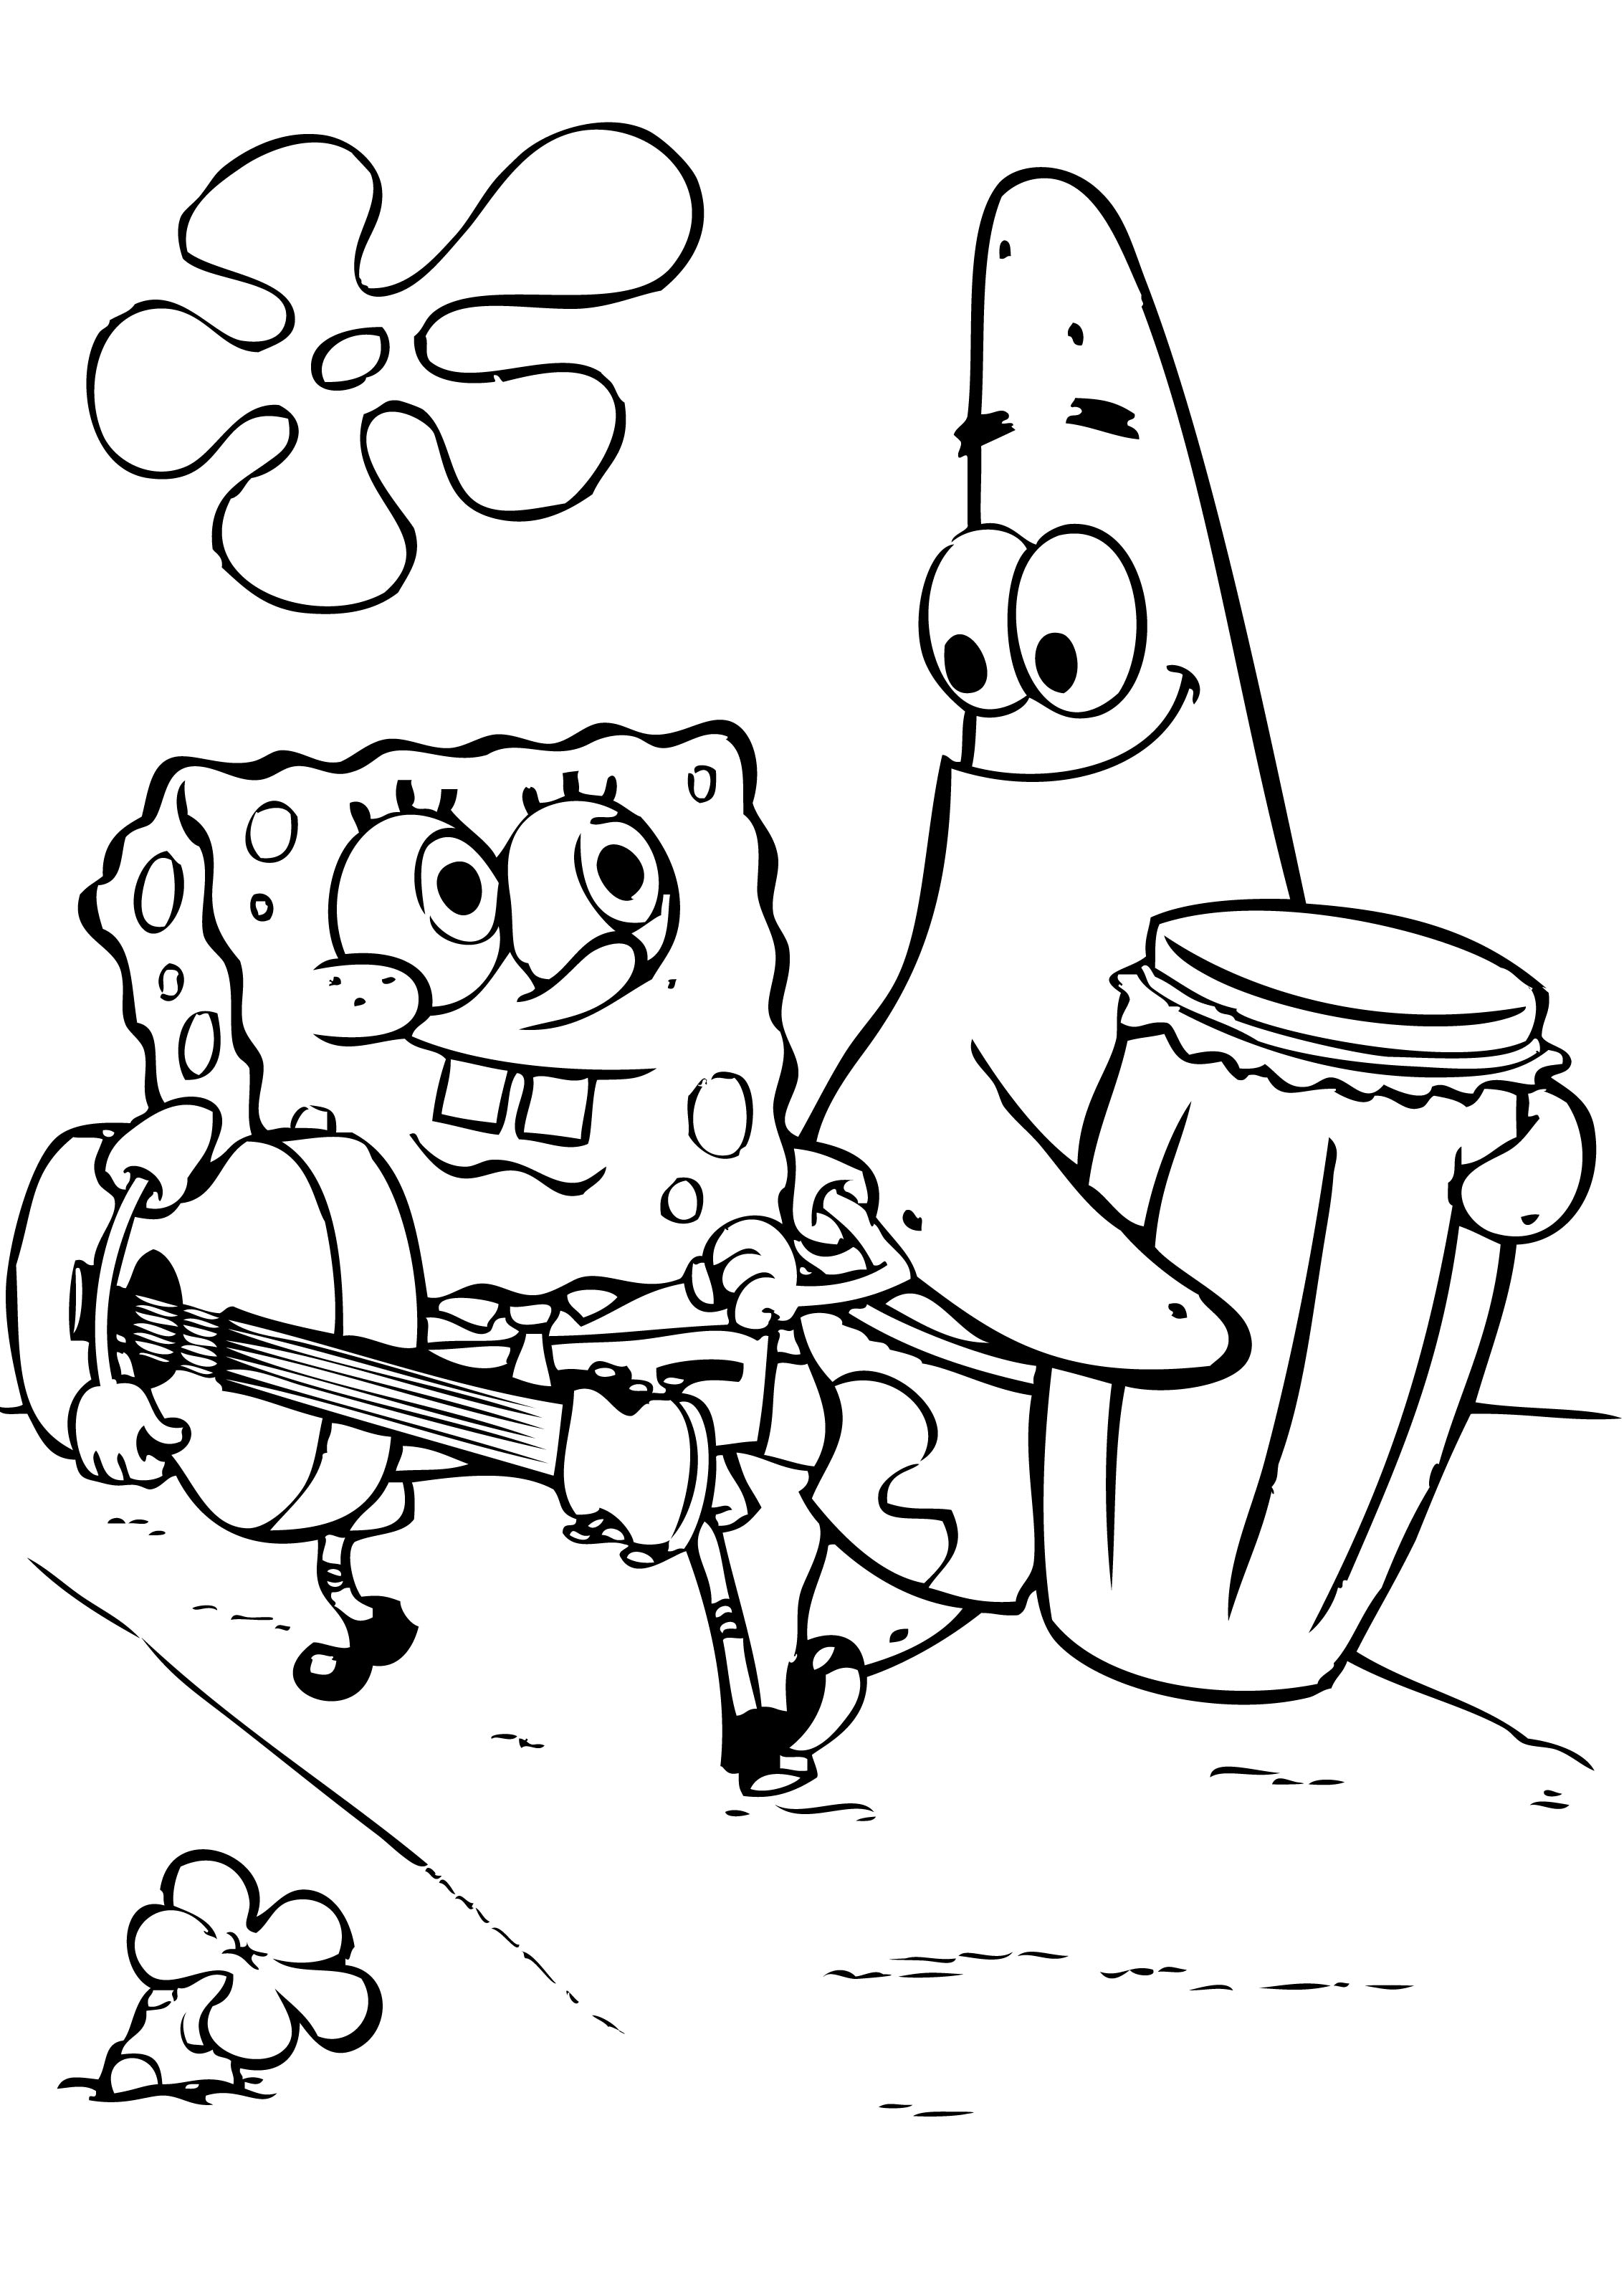 Spongebob And Patrick Coloring Pages To Print - Coloring Kids